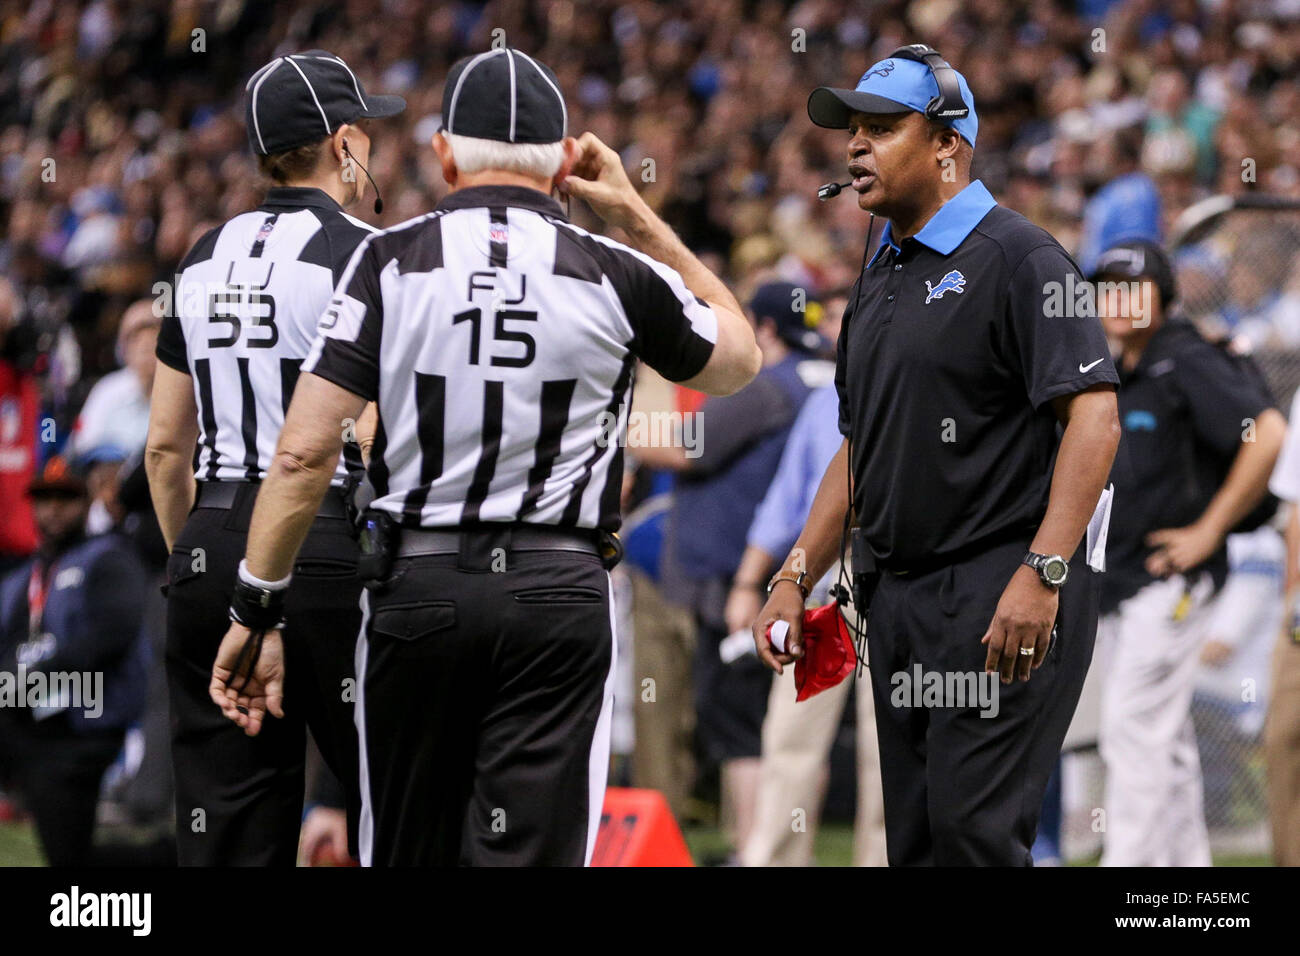 New Orleans, Louisiana, USA. 21st Dec, 2015. Detroit Lions head coach Jim Caldwell challenges a play during the game between the New Orleans Saints and the Detroit Lions at the Mercedes-Benz Superdome in New Orleans, LA. Detroit Lions defeated New Orleans Saints 35-27. Stephen Lew/CSM Credit:  Cal Sport Media/Alamy Live News Stock Photo